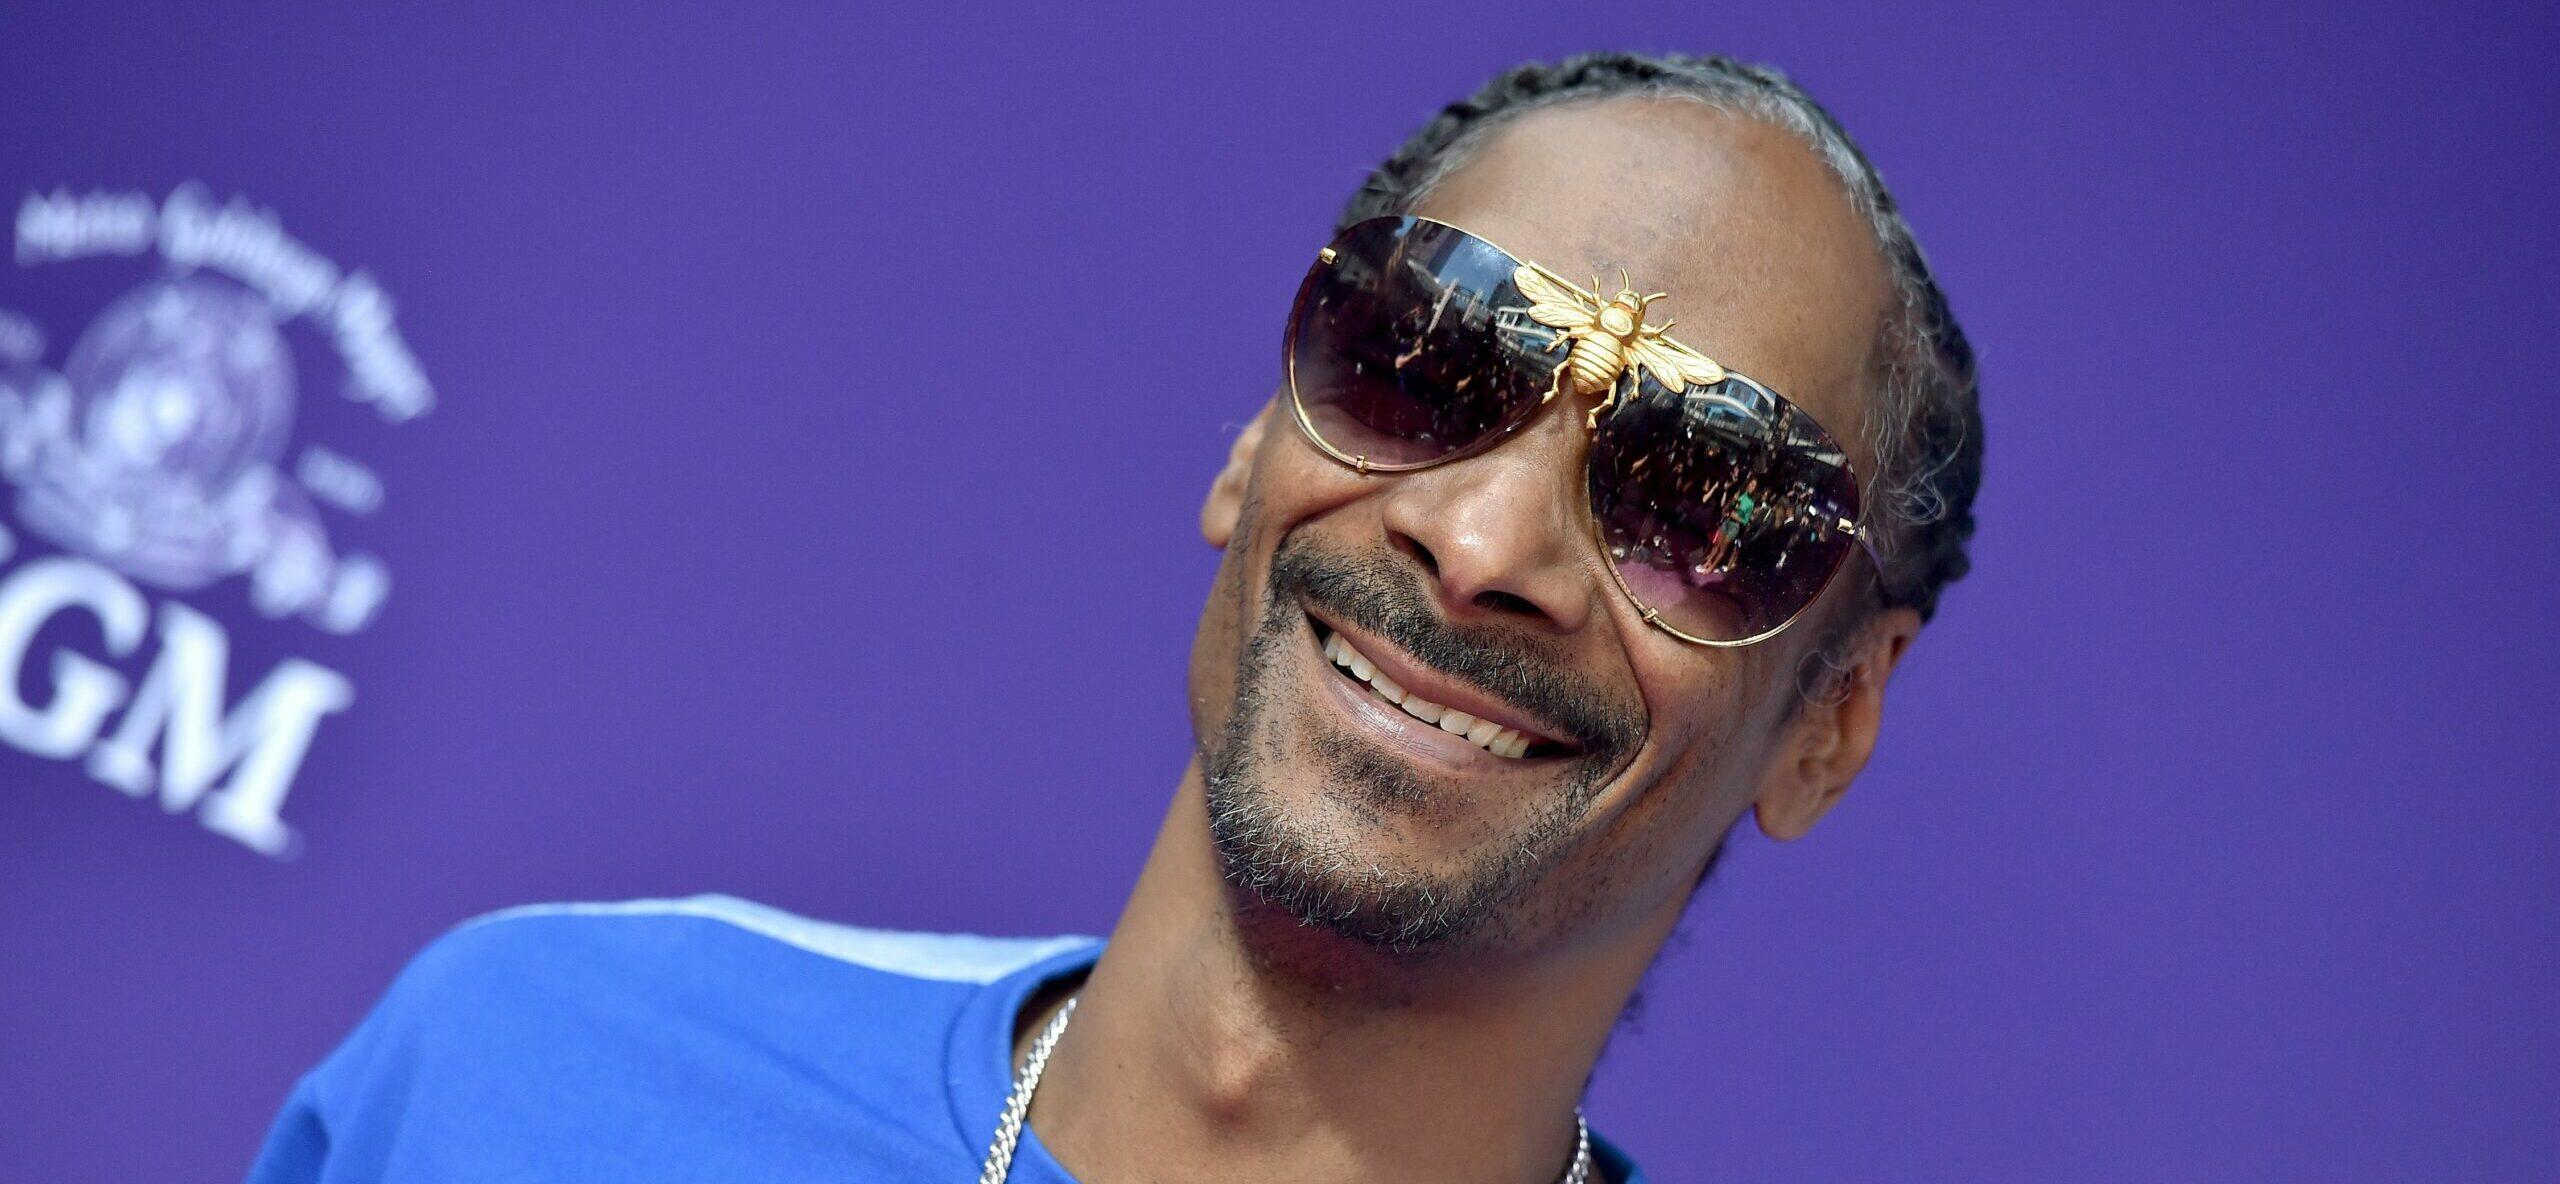 Snoop Dogg Raises The Salary Of His Full-Time Blunt Roller Due To Inflation